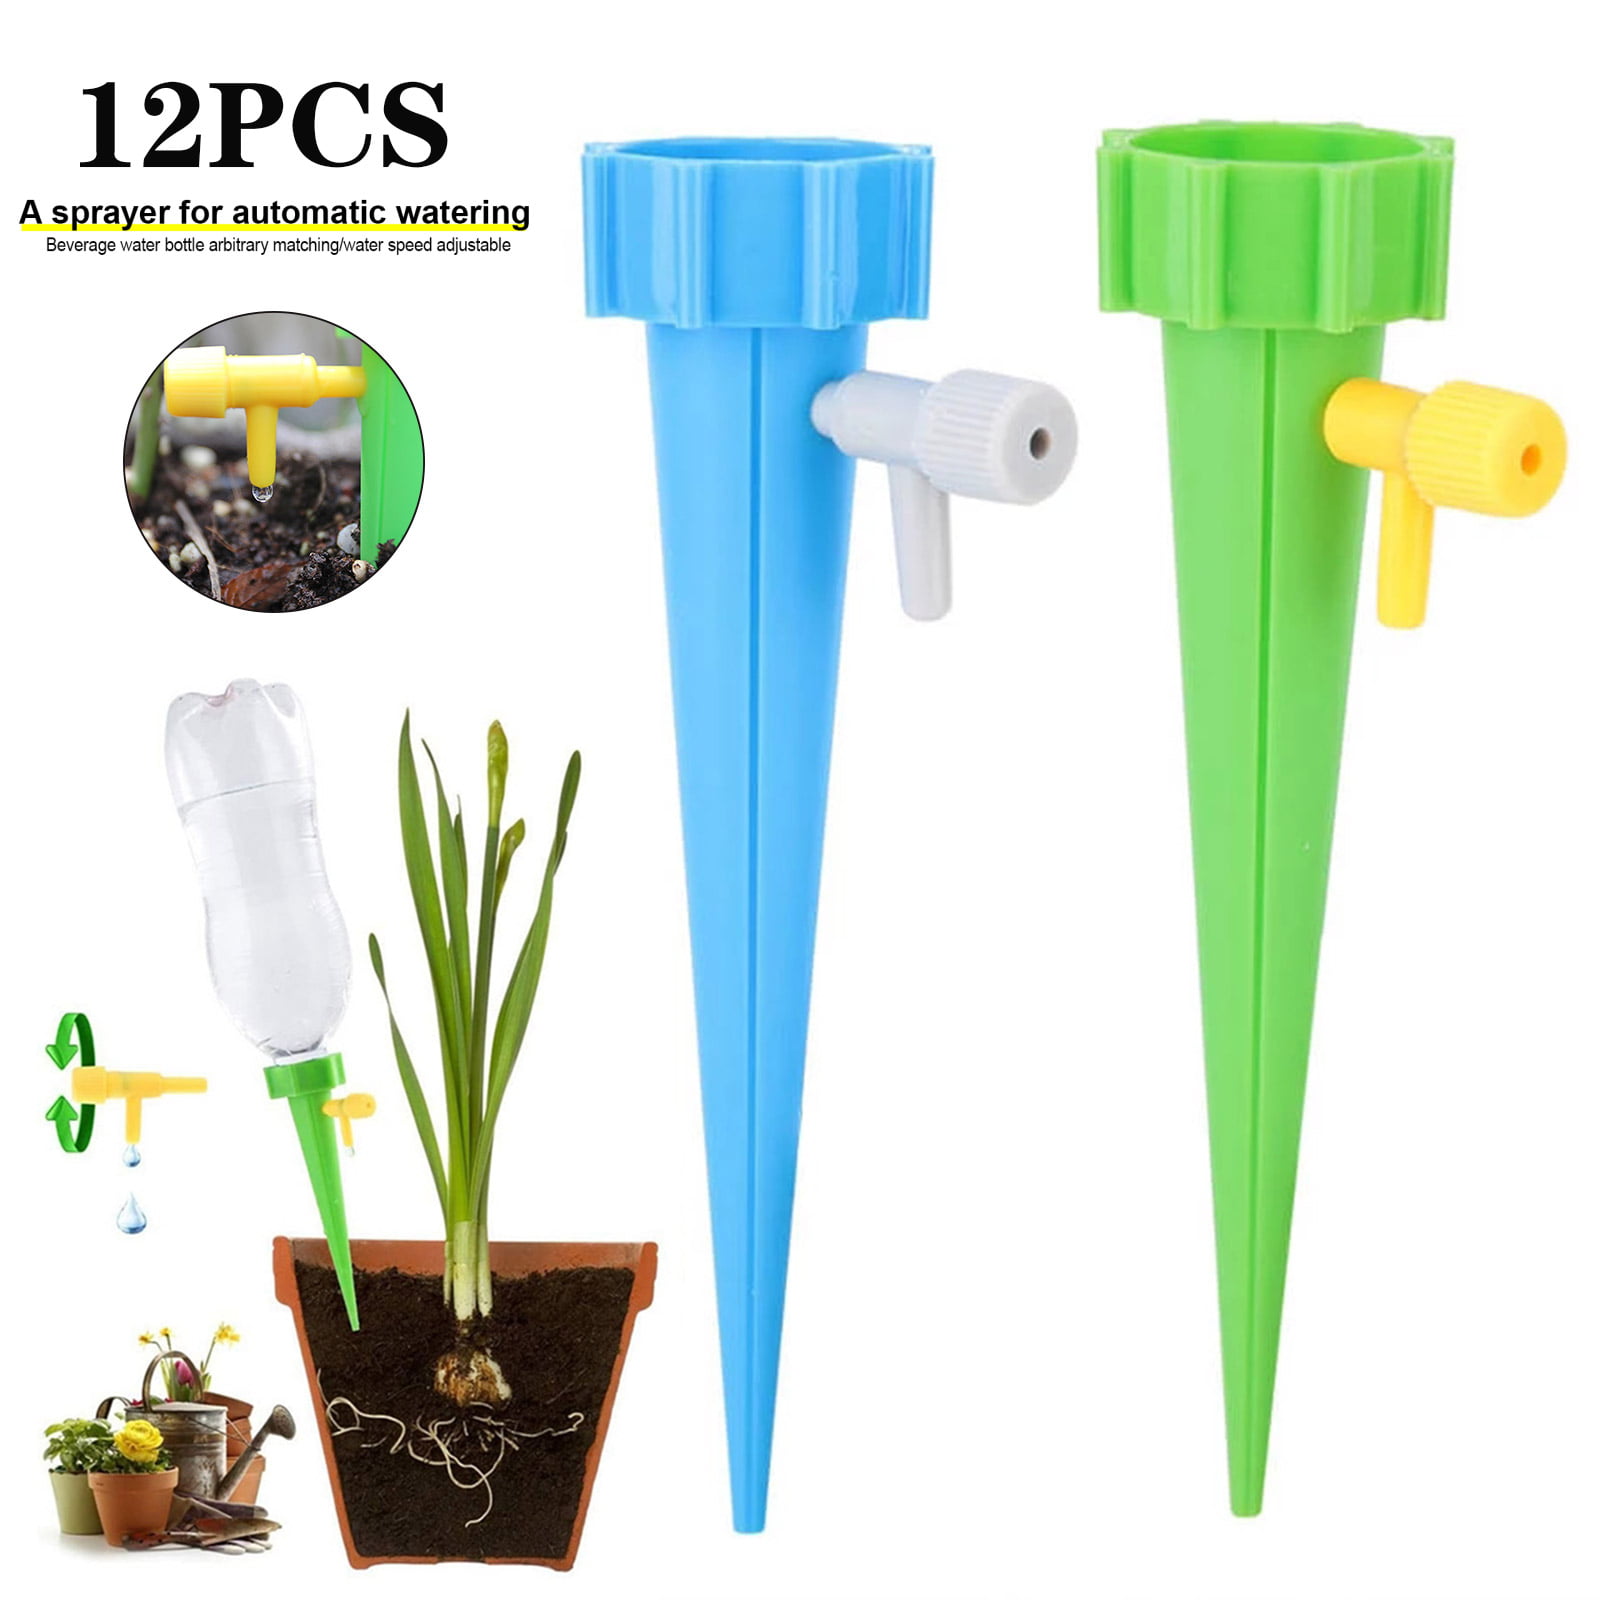 Details about   12 to 60 PCS Plant Waterer Self Watering Spikes Device Constant Pressure/Bracket 